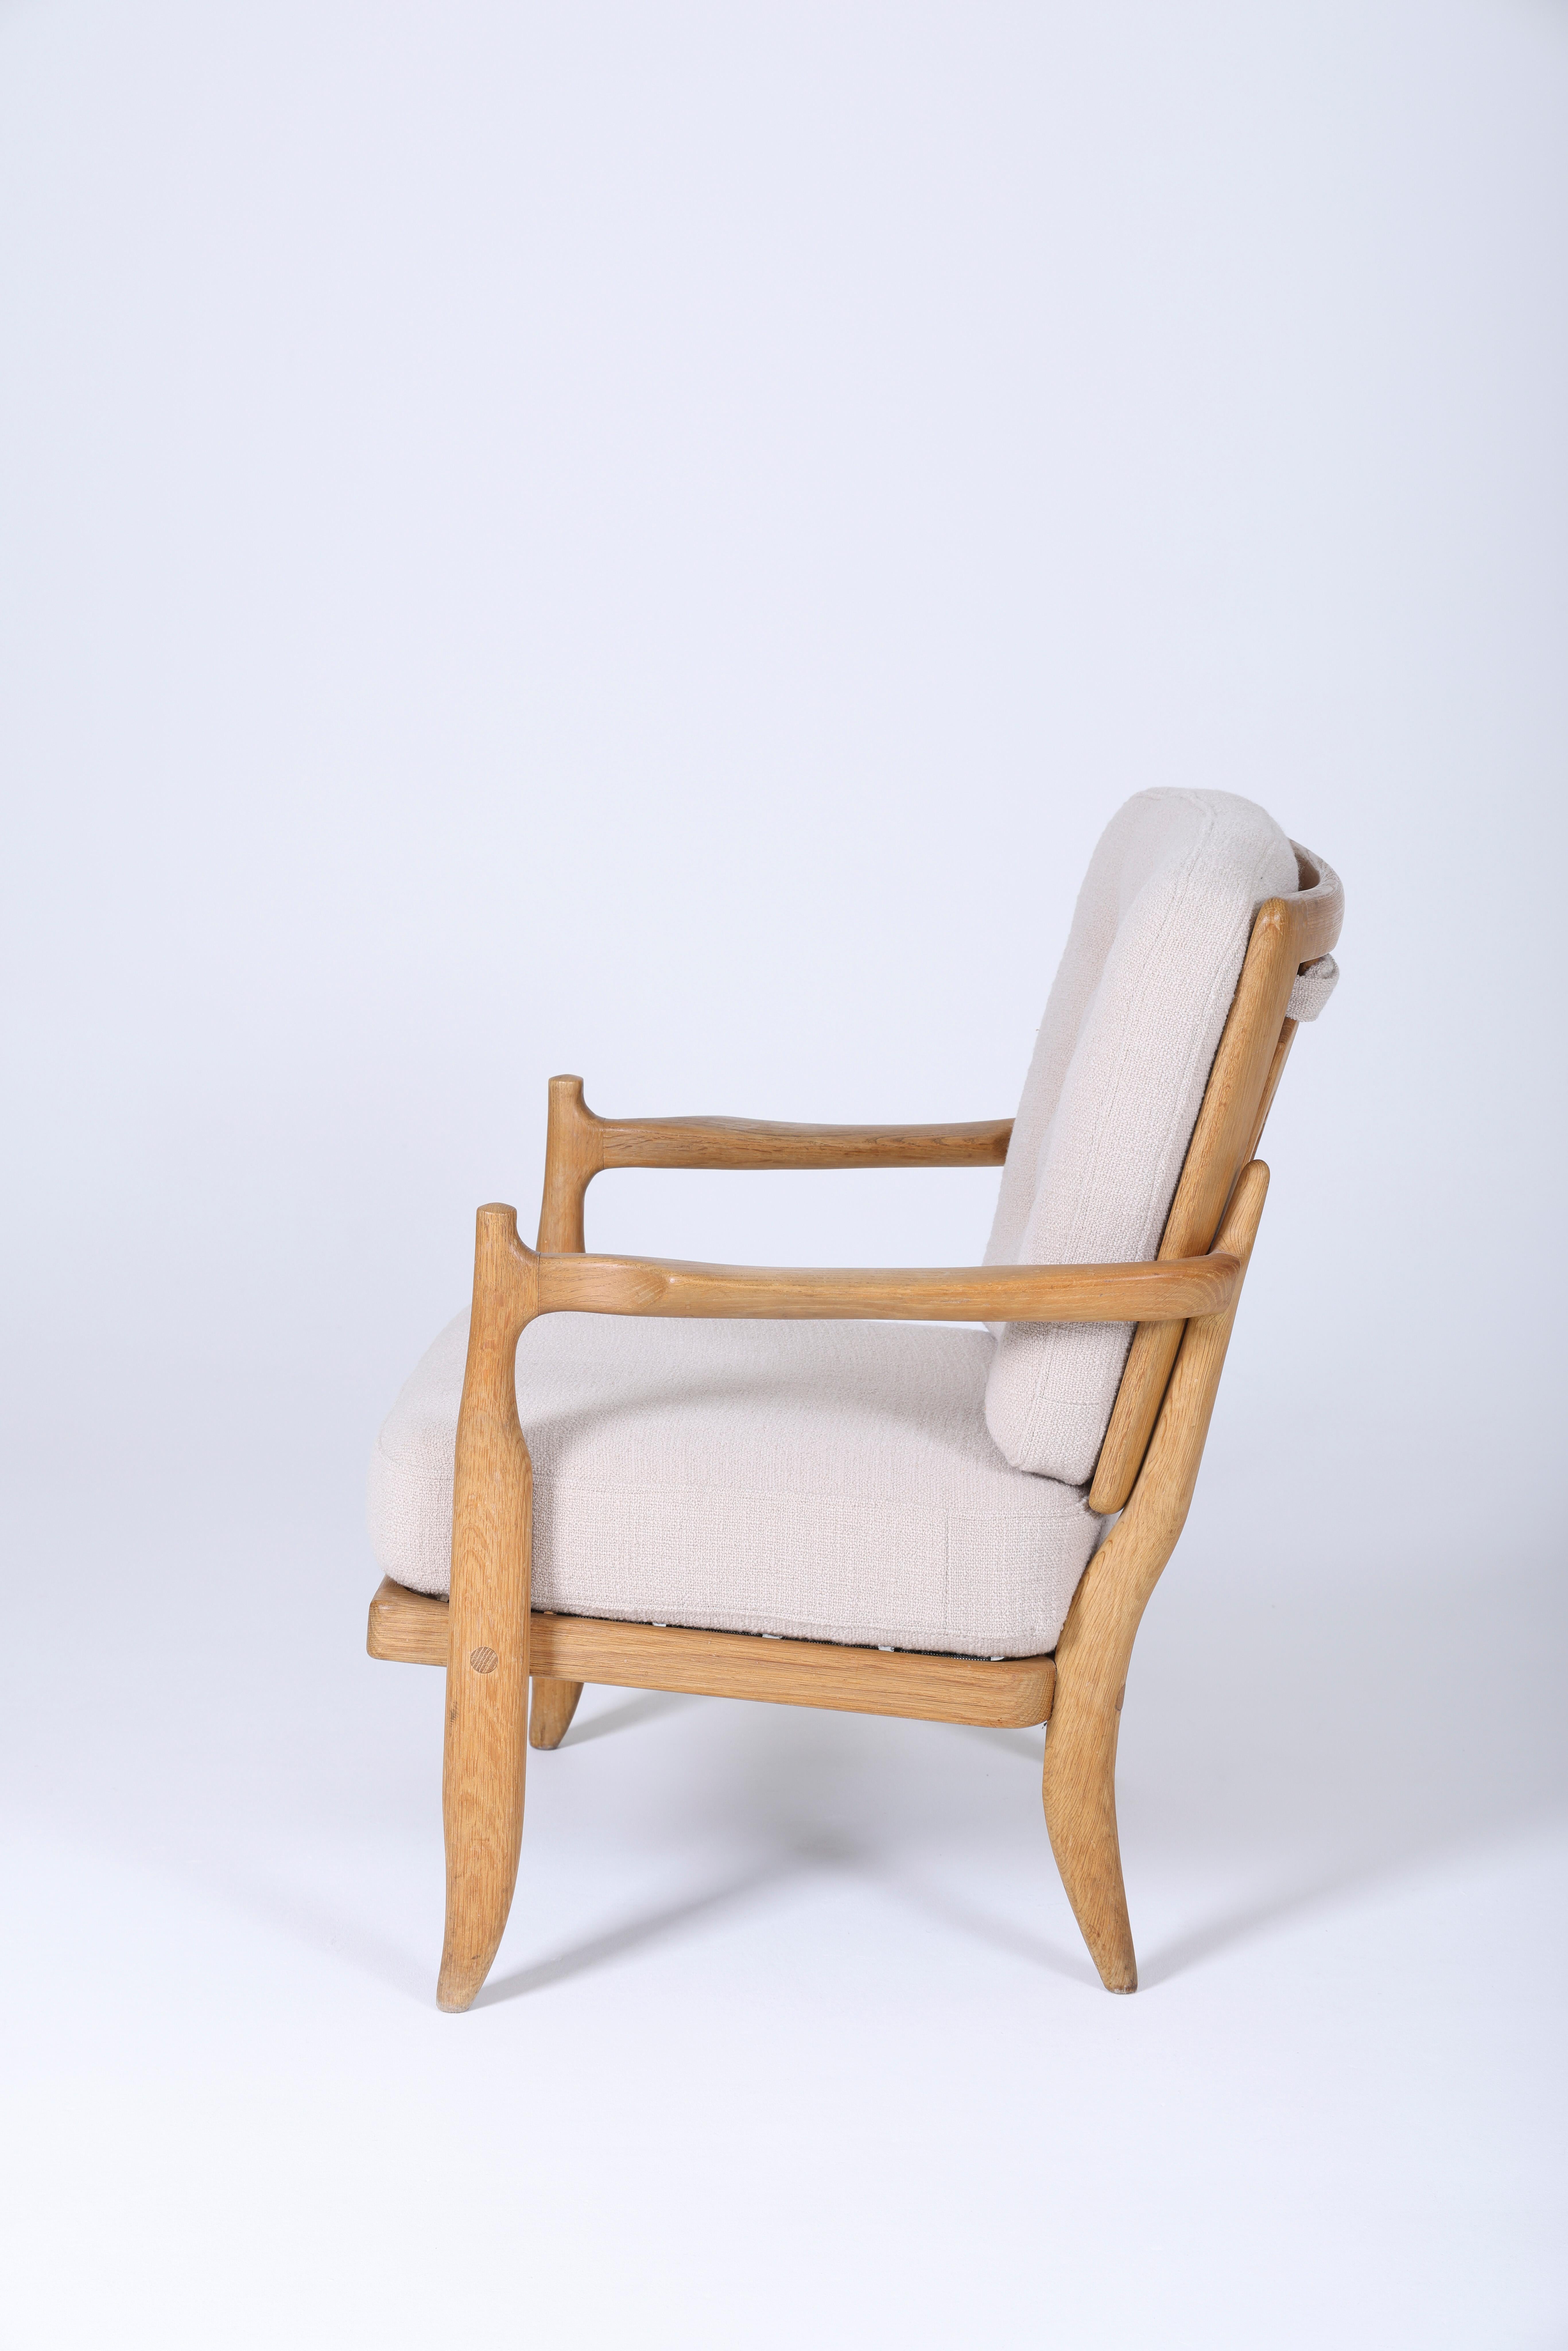 20th Century Wooden armchair by Guillerme and Chambron